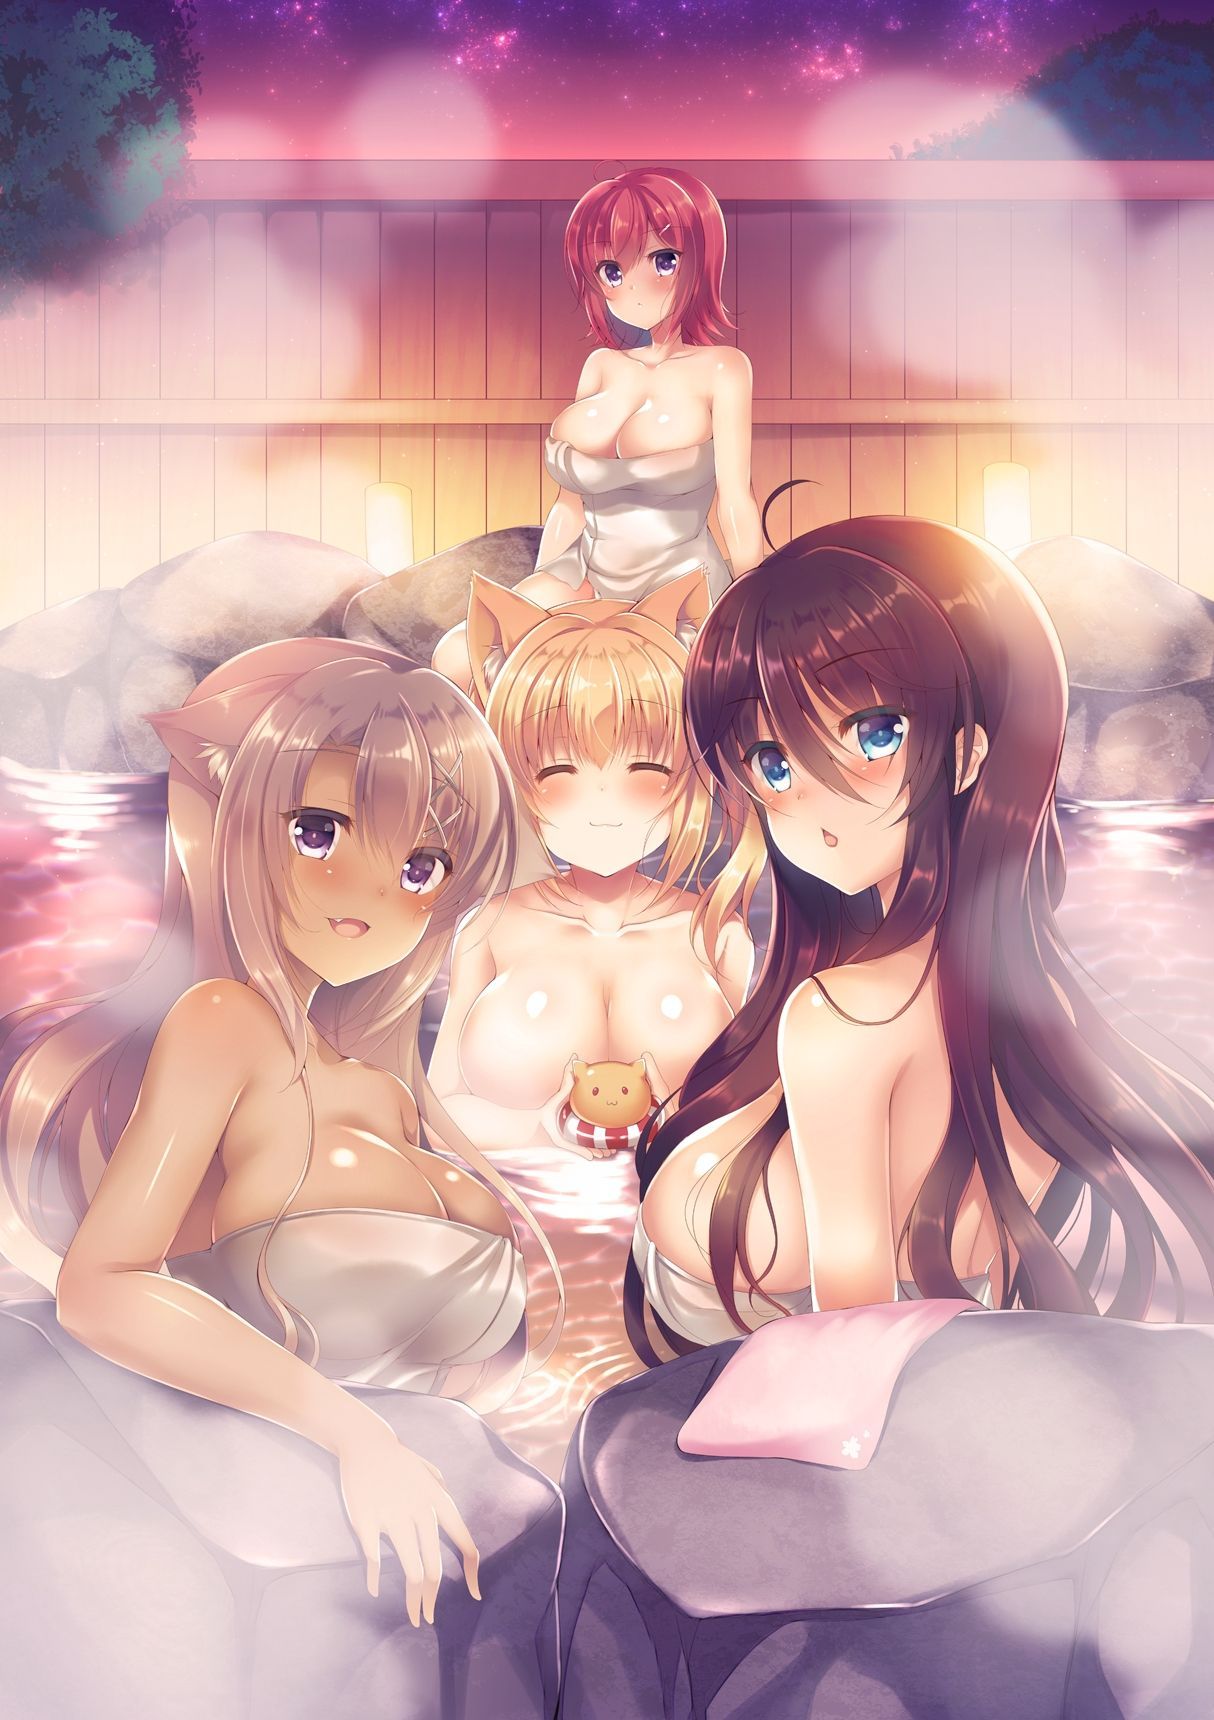 【Secondary erotic】 Click here for erotic images of girls in baths and hot springs where nudes can be worshiped 15